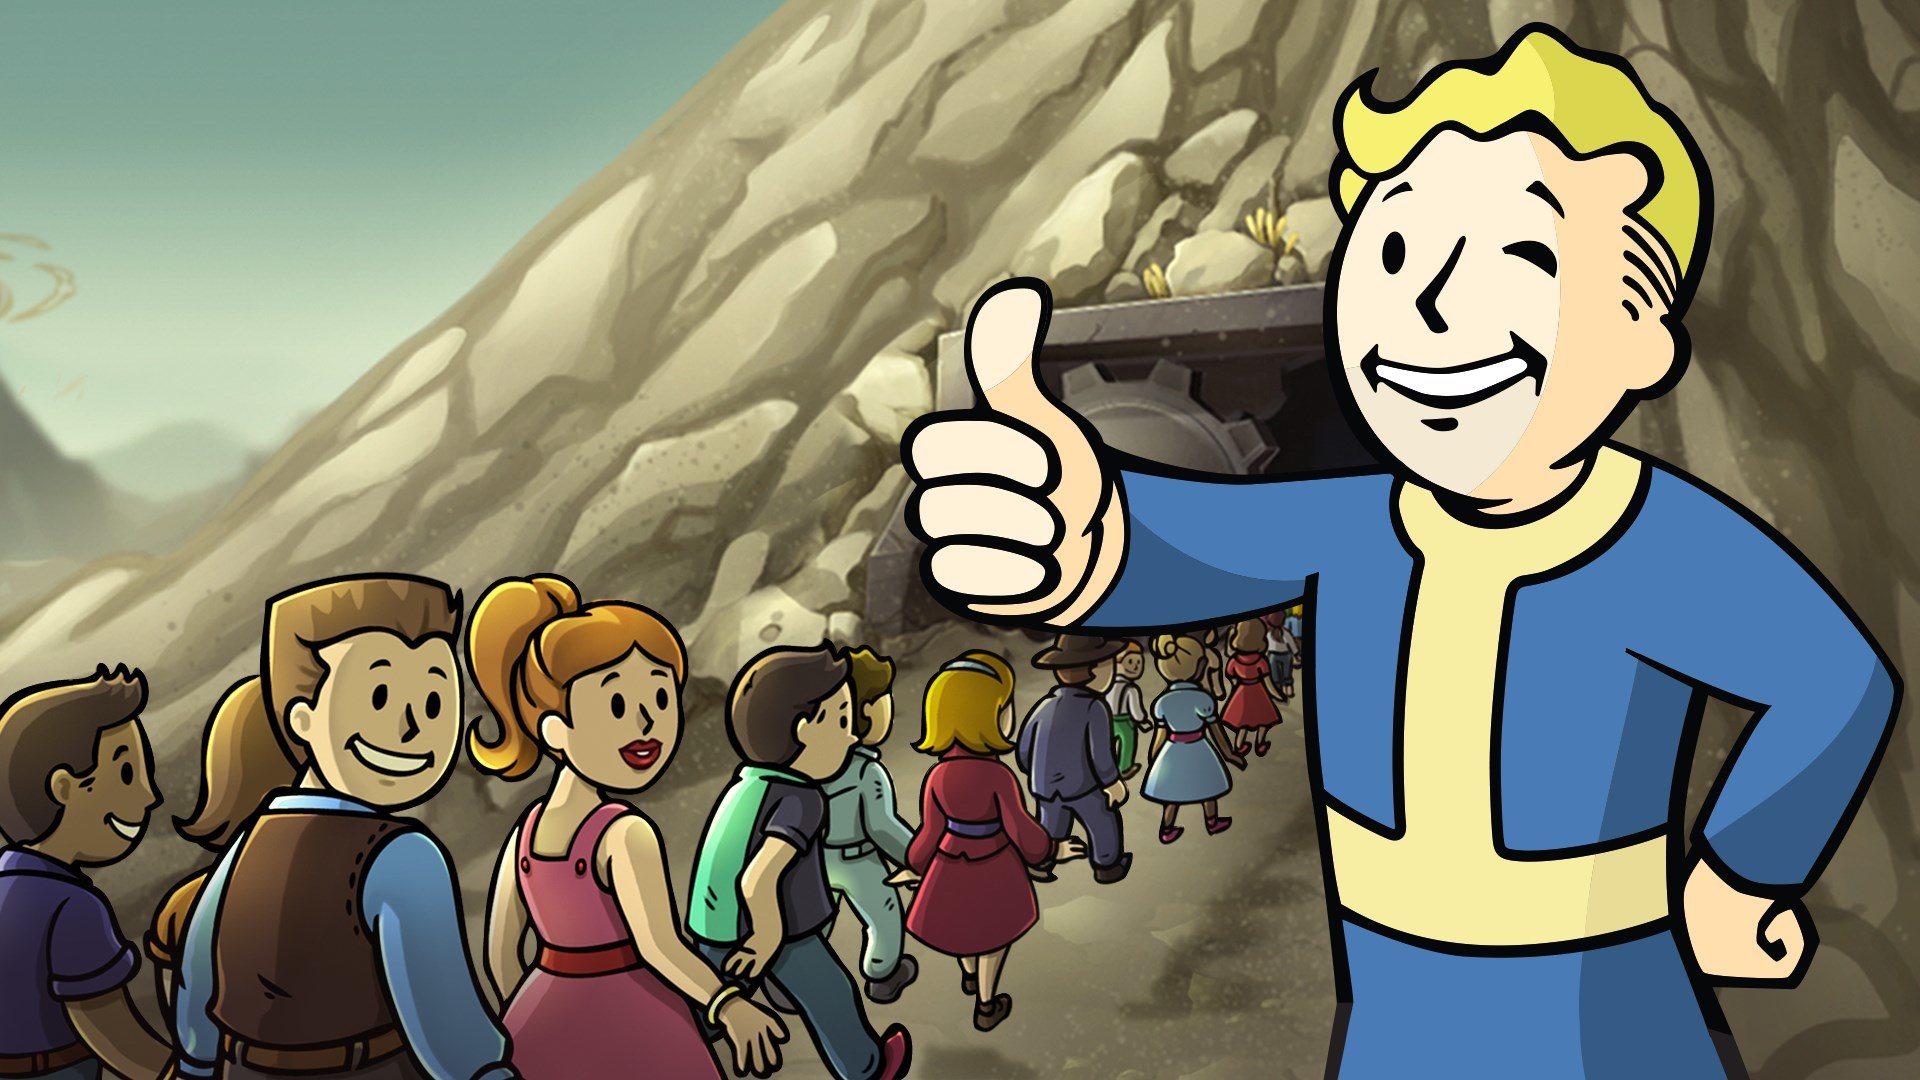 game fallout shelter